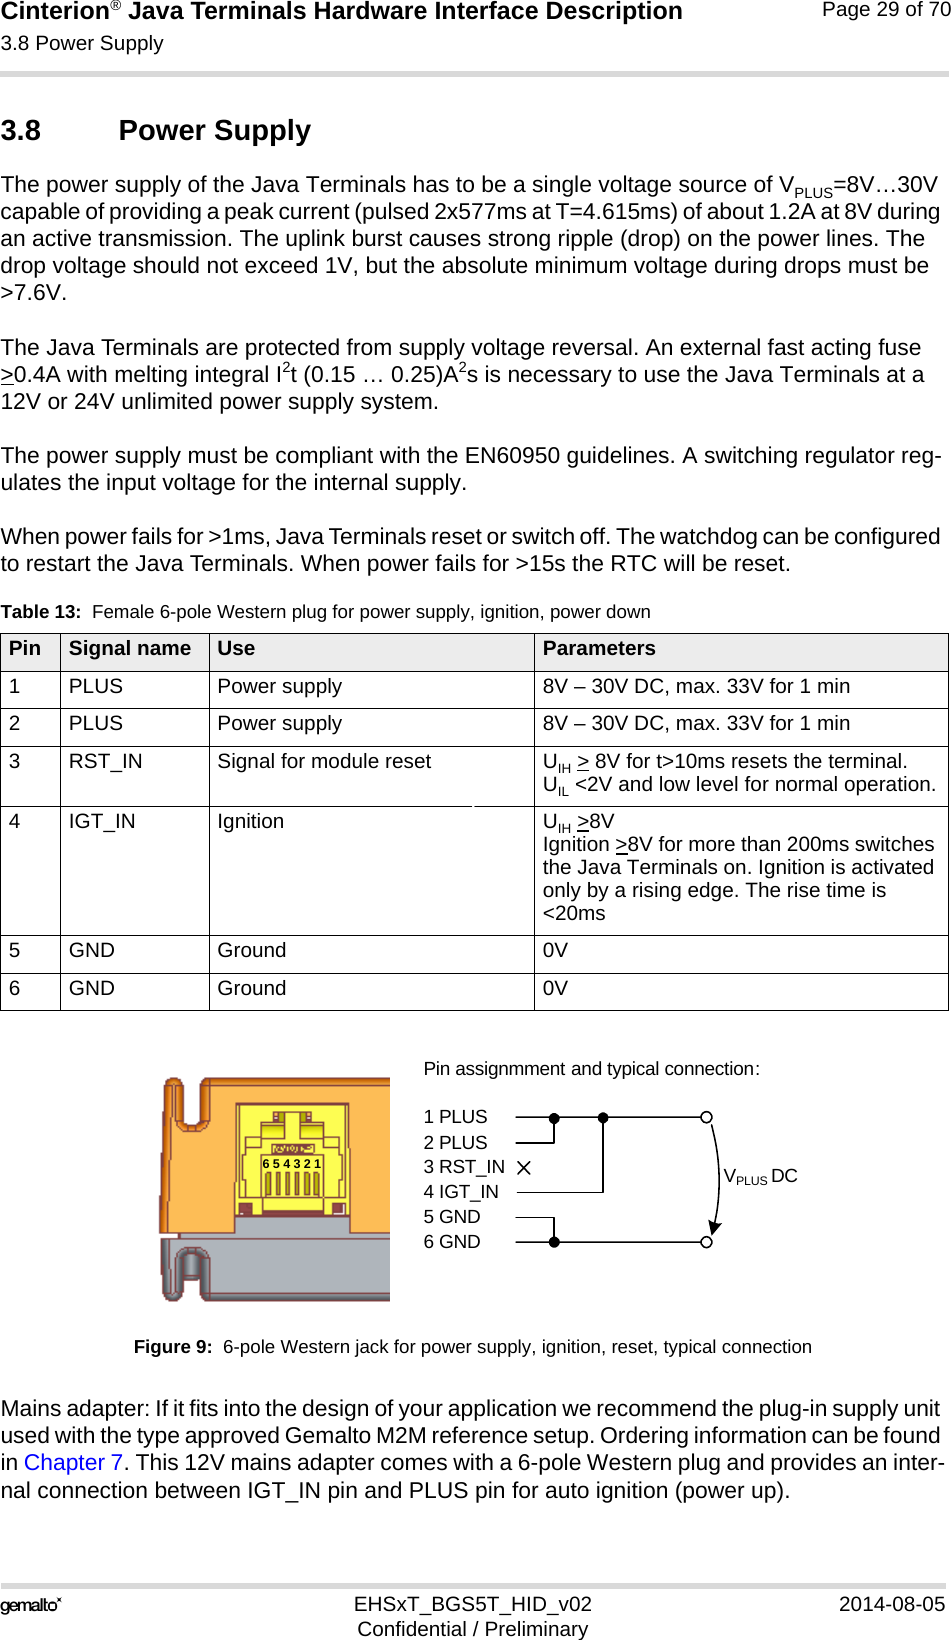 Cinterion® Java Terminals Hardware Interface Description3.8 Power Supply35EHSxT_BGS5T_HID_v02 2014-08-05Confidential / PreliminaryPage 29 of 703.8 Power SupplyThe power supply of the Java Terminals has to be a single voltage source of VPLUS=8V…30V capable of providing a peak current (pulsed 2x577ms at T=4.615ms) of about 1.2A at 8V during an active transmission. The uplink burst causes strong ripple (drop) on the power lines. The drop voltage should not exceed 1V, but the absolute minimum voltage during drops must be &gt;7.6V. The Java Terminals are protected from supply voltage reversal. An external fast acting fuse &gt;0.4A with melting integral I2t (0.15 … 0.25)A2s is necessary to use the Java Terminals at a 12V or 24V unlimited power supply system.The power supply must be compliant with the EN60950 guidelines. A switching regulator reg-ulates the input voltage for the internal supply.When power fails for &gt;1ms, Java Terminals reset or switch off. The watchdog can be configured to restart the Java Terminals. When power fails for &gt;15s the RTC will be reset.Figure 9:  6-pole Western jack for power supply, ignition, reset, typical connectionMains adapter: If it fits into the design of your application we recommend the plug-in supply unit used with the type approved Gemalto M2M reference setup. Ordering information can be found in Chapter 7. This 12V mains adapter comes with a 6-pole Western plug and provides an inter-nal connection between IGT_IN pin and PLUS pin for auto ignition (power up).Table 13:  Female 6-pole Western plug for power supply, ignition, power downPin Signal name Use Parameters1 PLUS Power supply 8V – 30V DC, max. 33V for 1 min2 PLUS Power supply 8V – 30V DC, max. 33V for 1 min3 RST_IN Signal for module reset UIH &gt; 8V for t&gt;10ms resets the terminal.UIL &lt;2V and low level for normal operation.4 IGT_IN Ignition UIH &gt;8VIgnition &gt;8V for more than 200ms switches the Java Terminals on. Ignition is activated only by a rising edge. The rise time is &lt;20ms5 GND Ground 0V6 GND Ground 0VPin assignmment and typical connection:1 PLUS2 PLUS3 RST_IN4 IGT_IN5 GND6 GNDVPLUS DC6 5 4 3 2 111